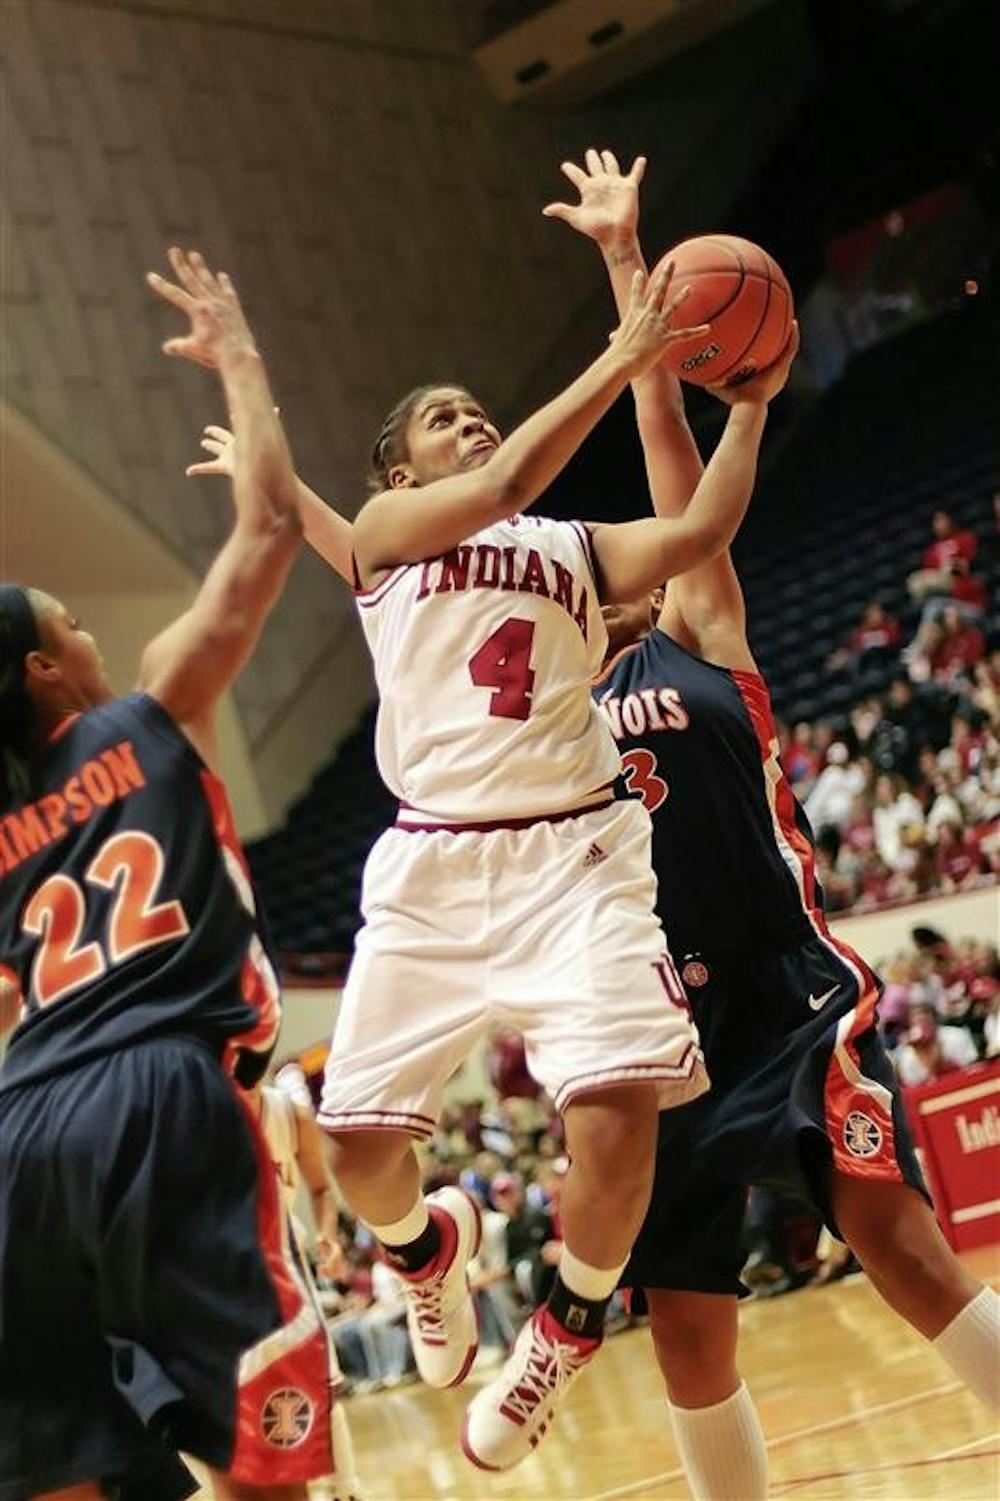 Freshman guard Ashlee Mells splits the Illinois defense on her way to the hoop during the Hoosiers 66-59 loss to Illinois Sunday afternoon at Assembly Hall.